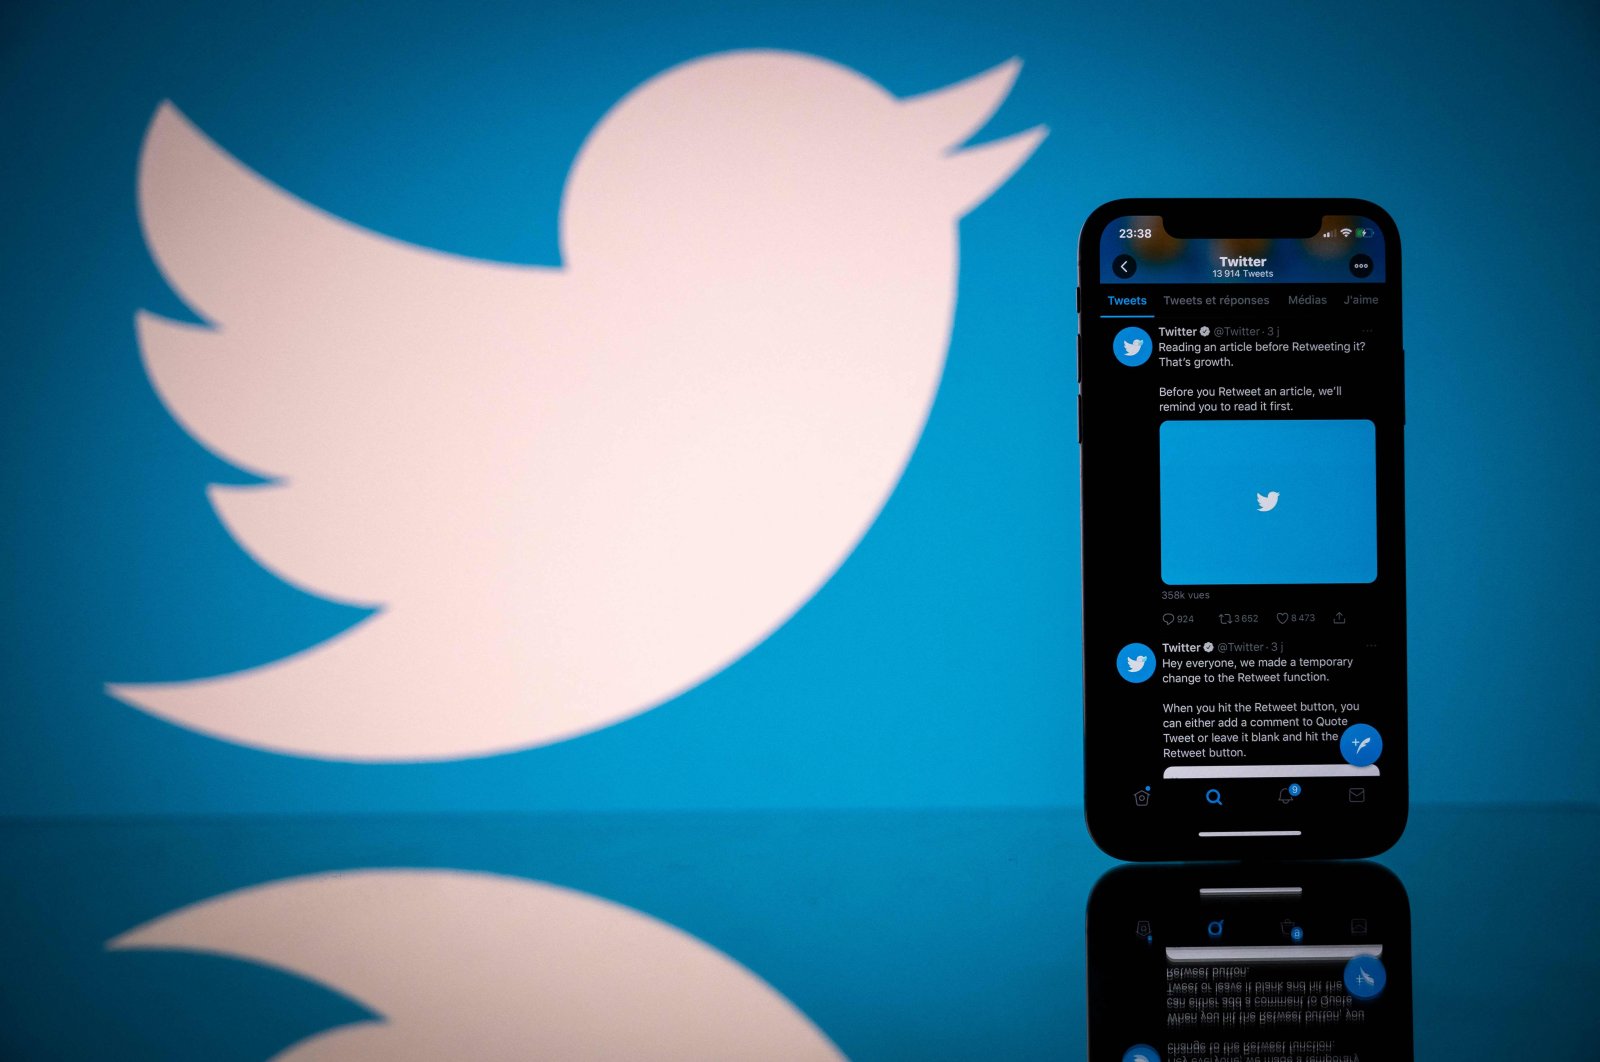 The logo of U.S. social network Twitter is displayed on the screen of a smartphone and a tablet in Toulouse, southern France, Oct. 26, 2020. (AFP Photo)